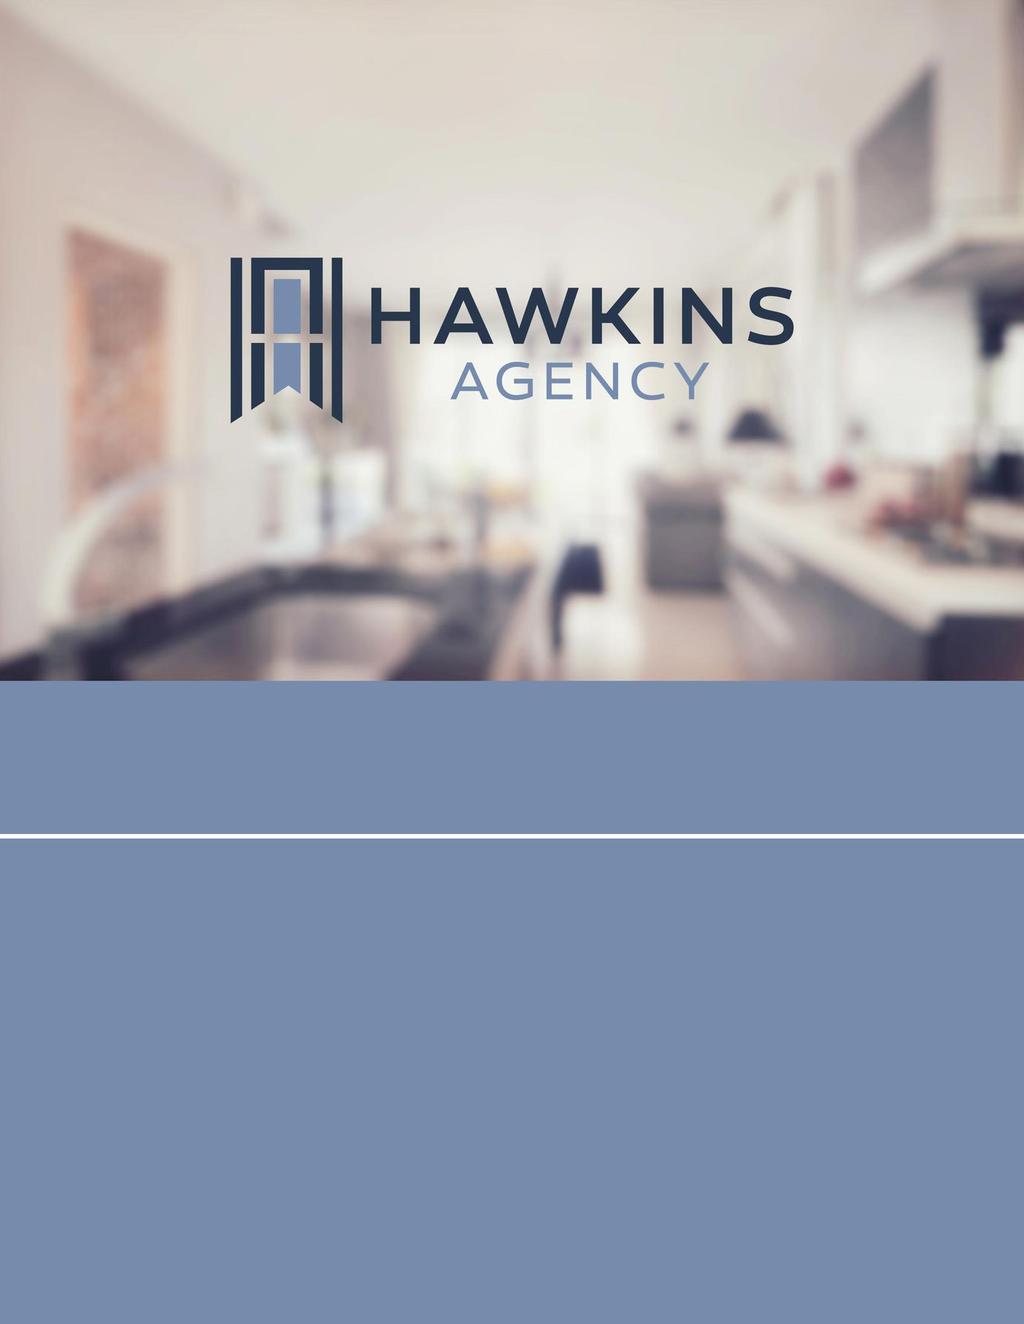 Seller's Guide A Brief Overview of the Home Selling Process with The Hawkins Agency The Hawkins Agency